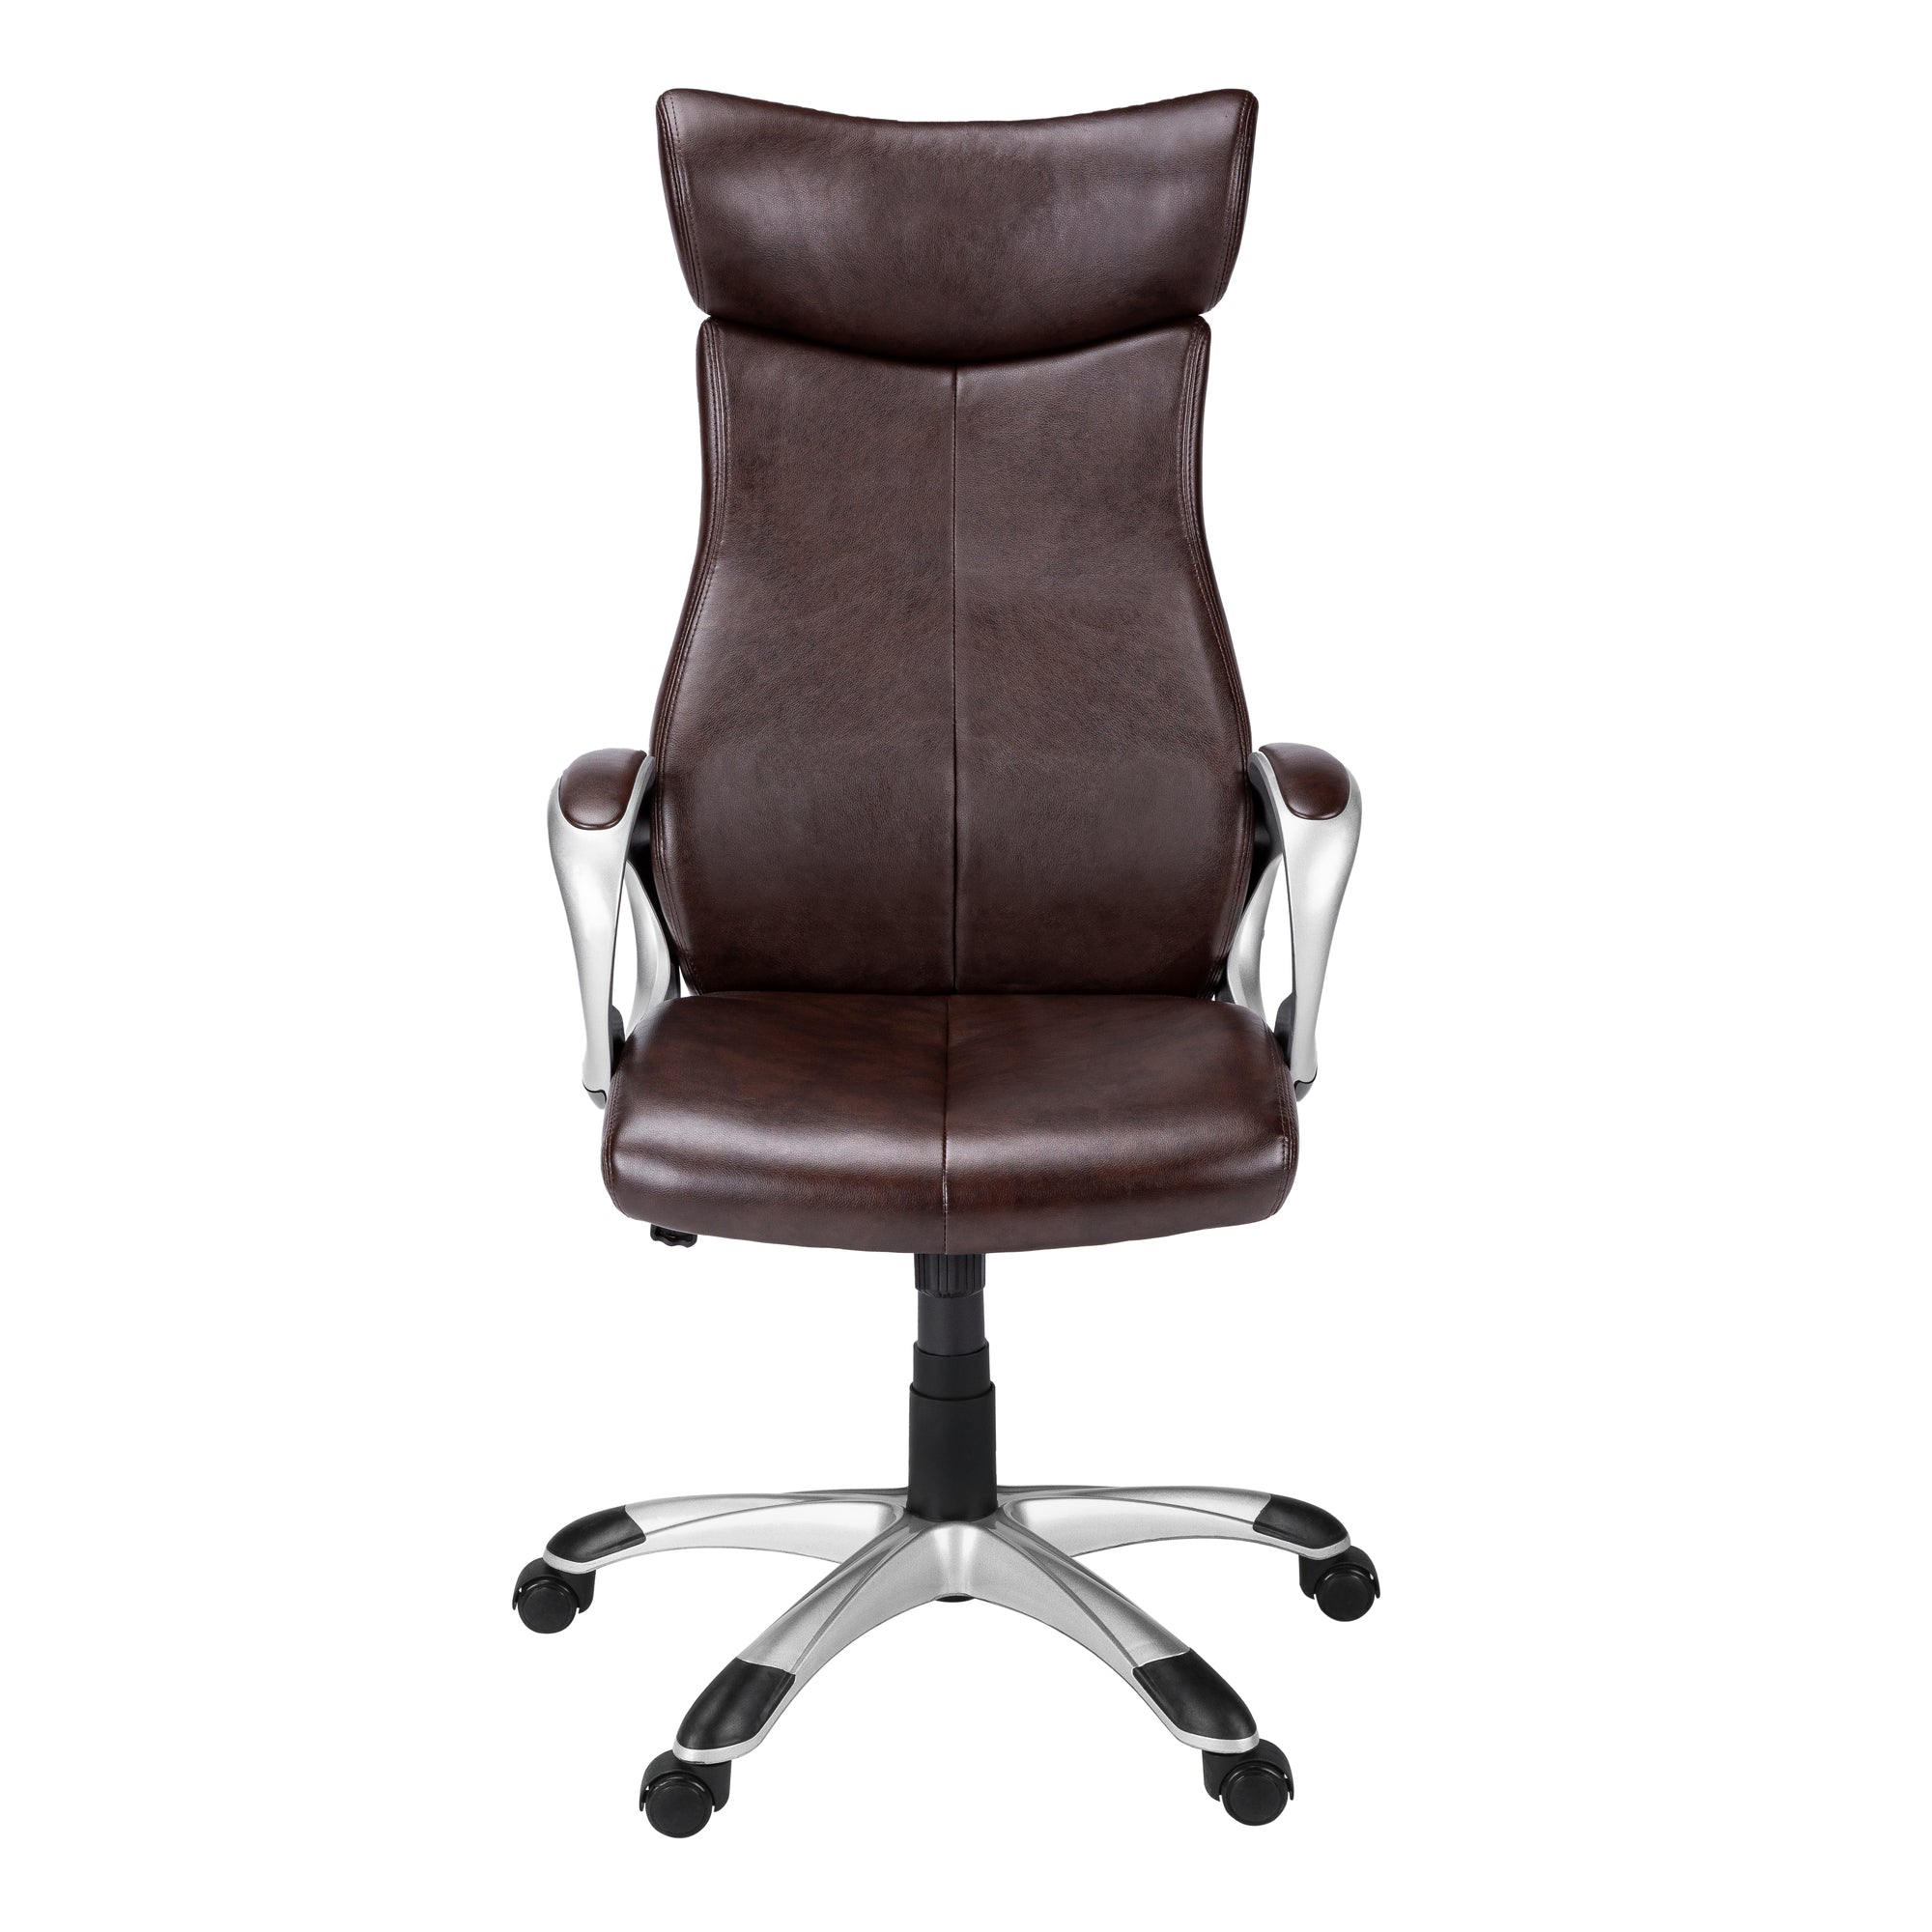 Office Chair - Brown Leather-Look / High Back Executive